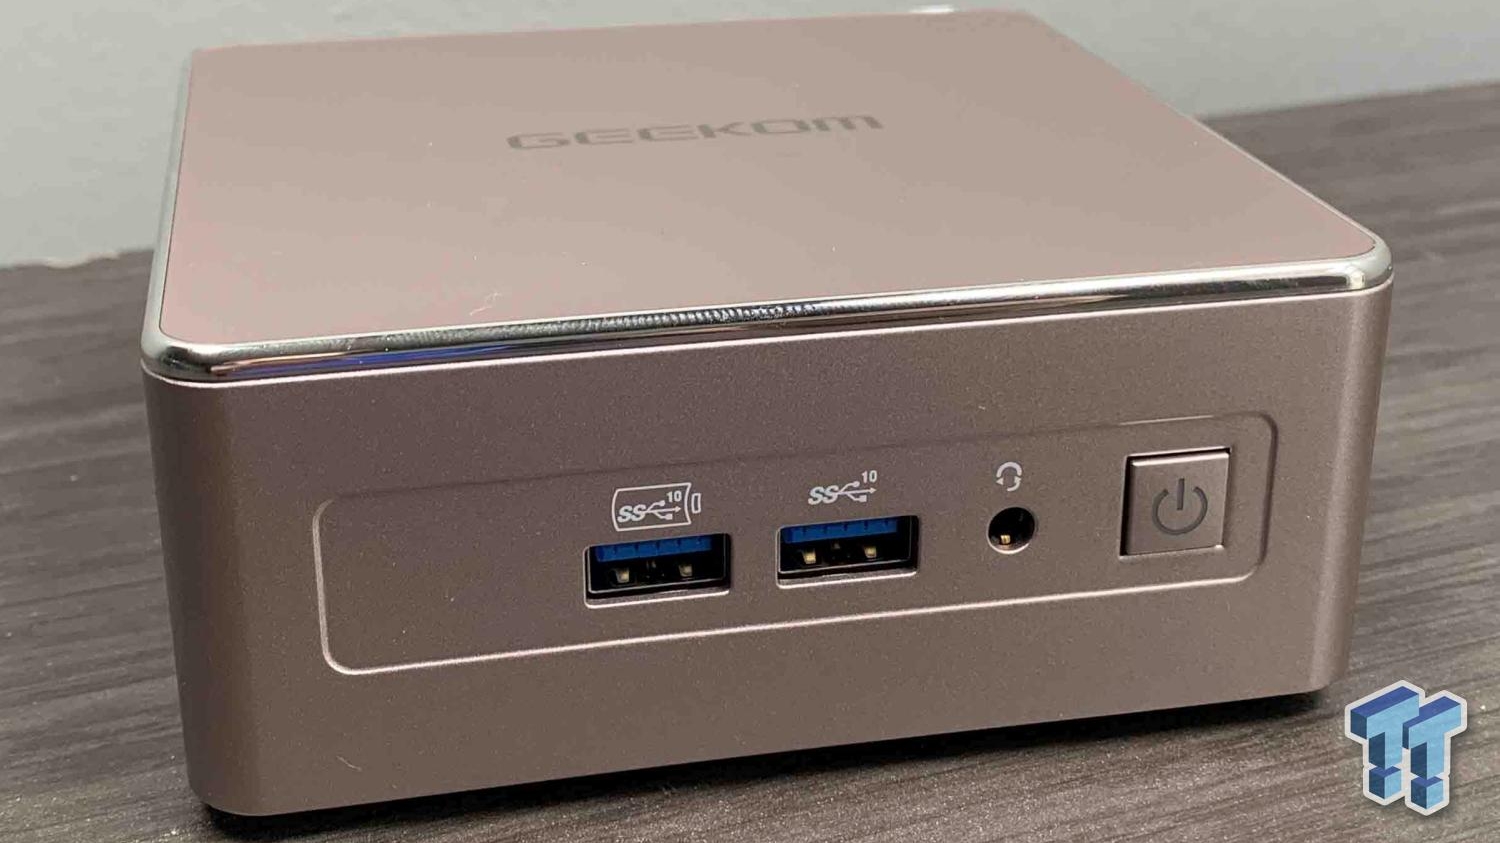 GEEKOM Mini IT13 & A5 review: More ports, choice between Intel and